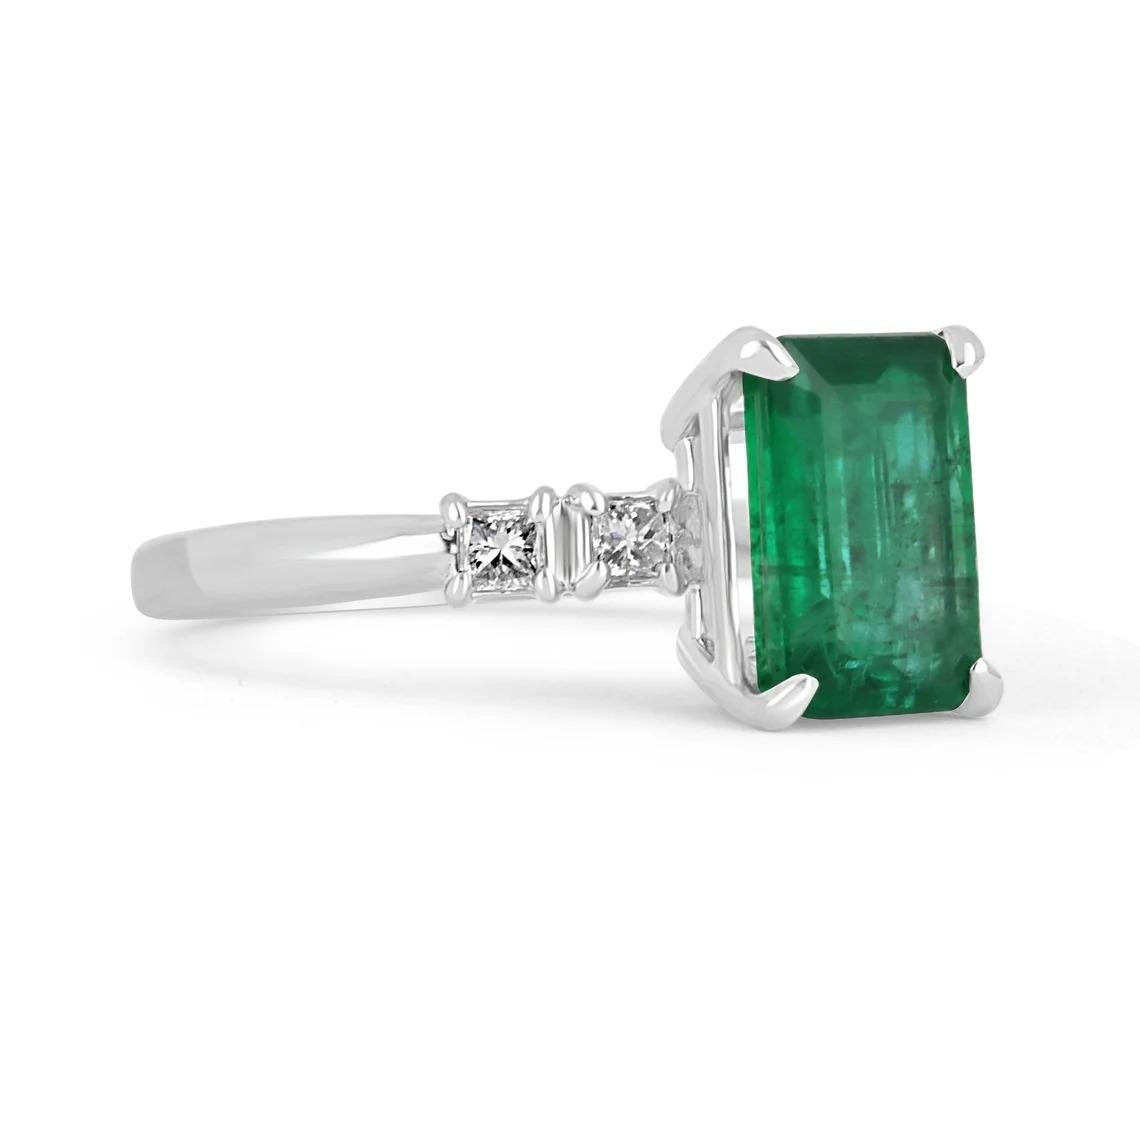 A stunning emerald and diamond engagement ring. The center stone features a four-prong set, 2.11-carat natural Zambian in emerald cut; displaying a rich dark green color and exceptional luster. Two princess-cut diamonds can be seen accenting both